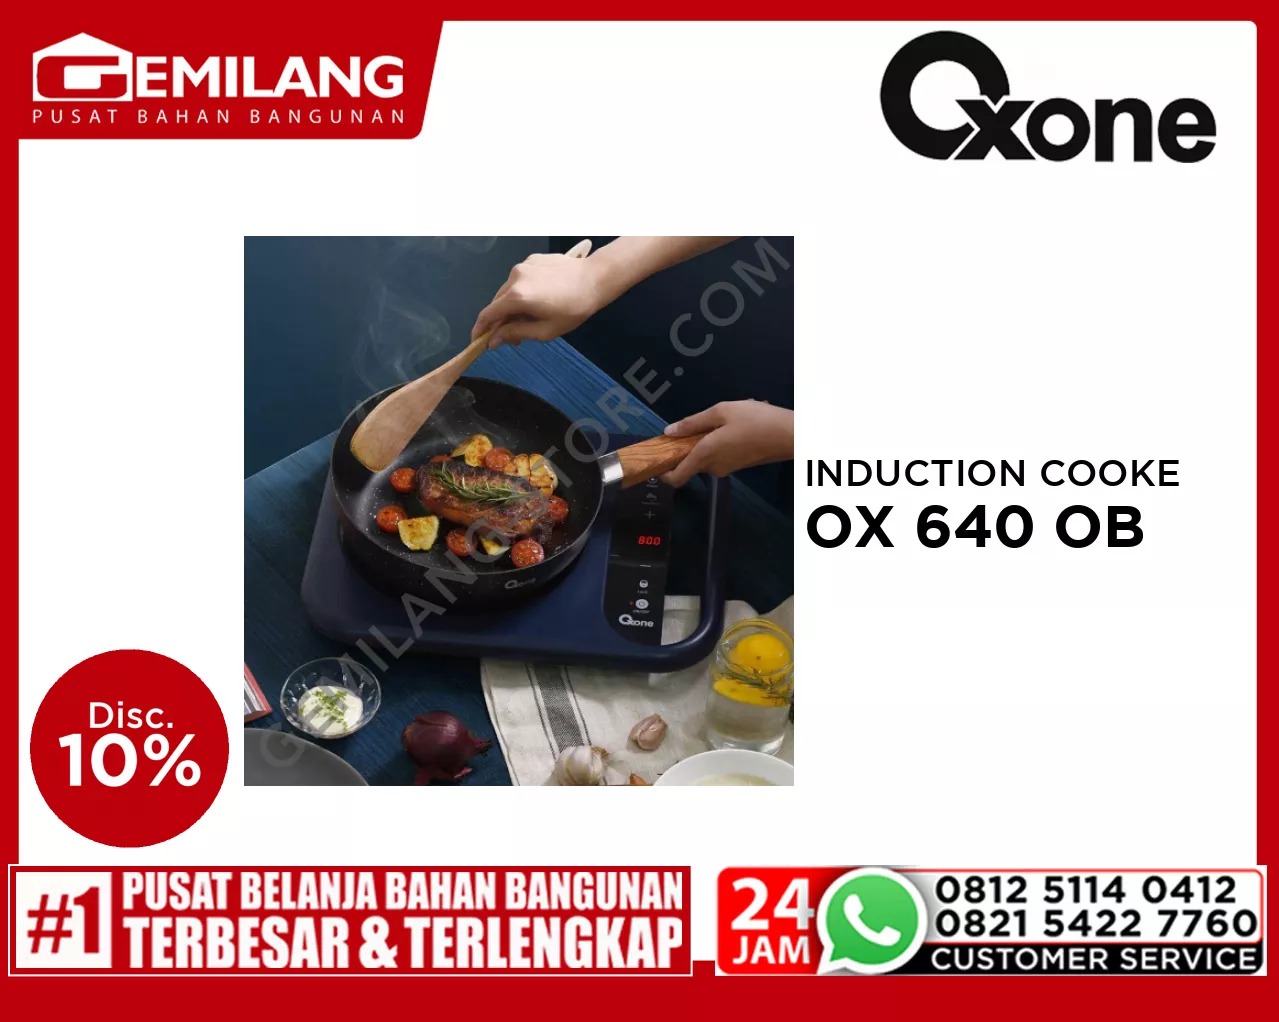 OXONE HANDEE PORTABLE INDUCTION COOKER OX 640 OB